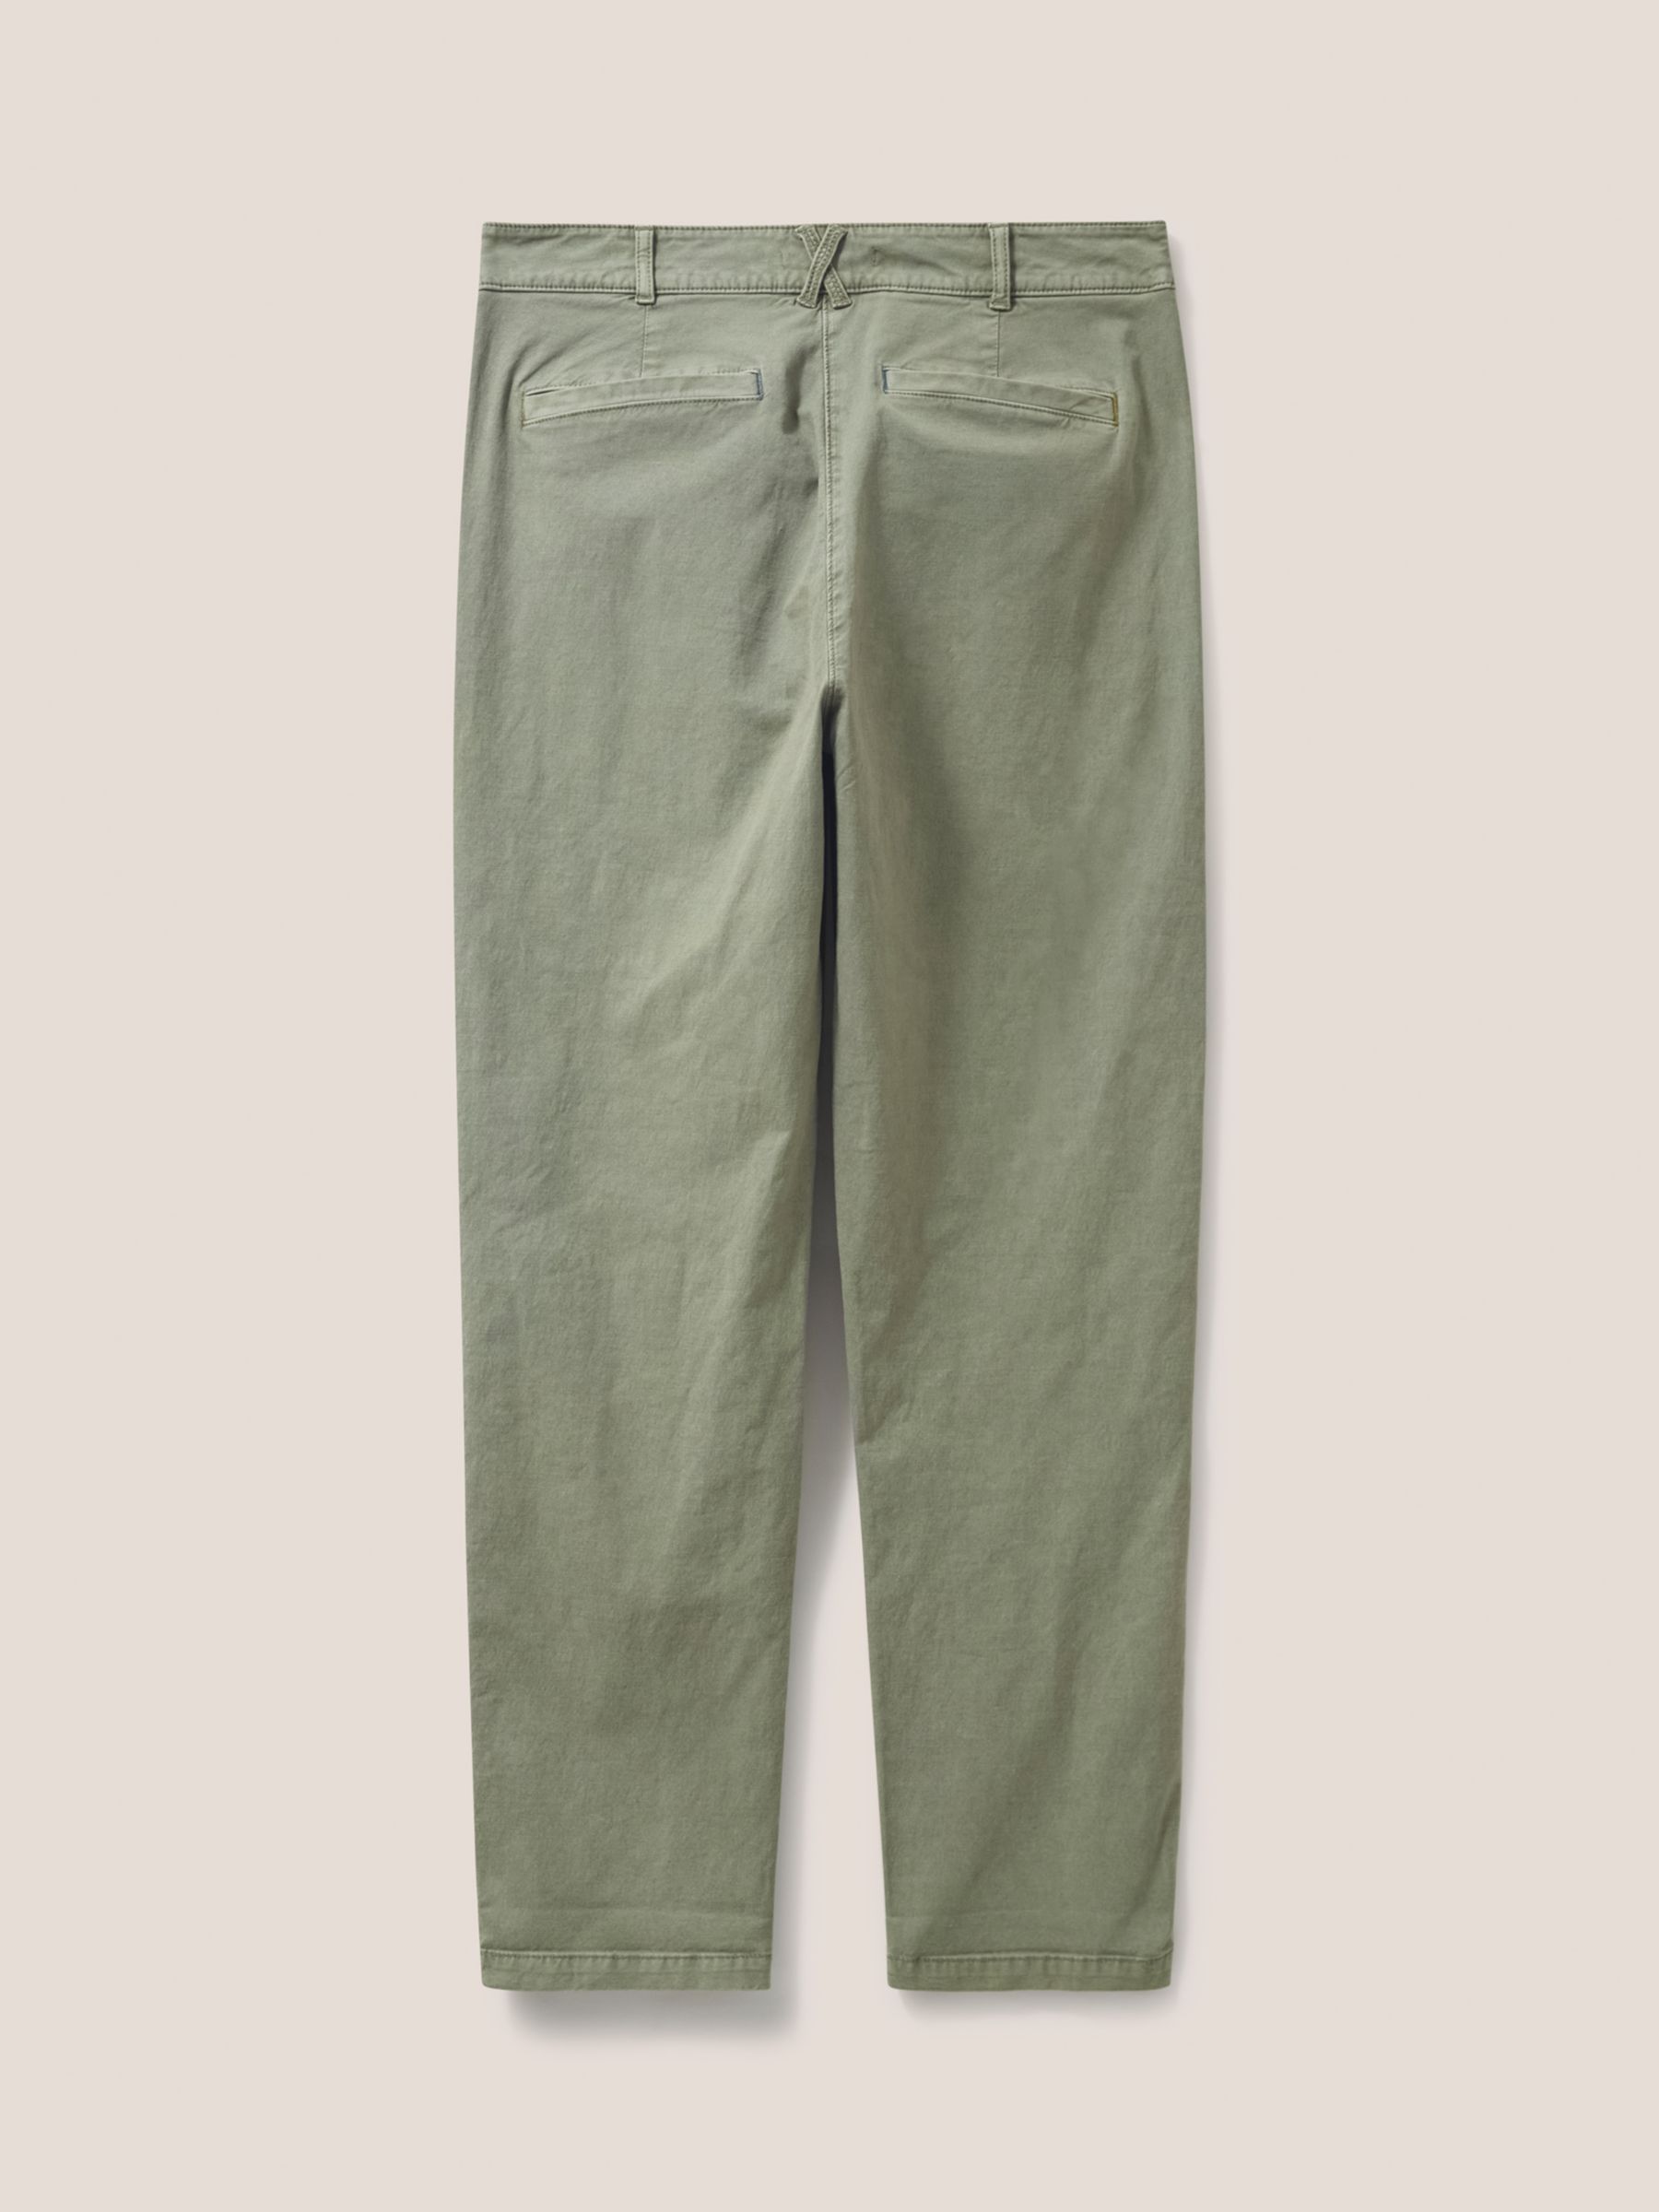 White Stuff Twister Chinos, Mid Green at John Lewis & Partners